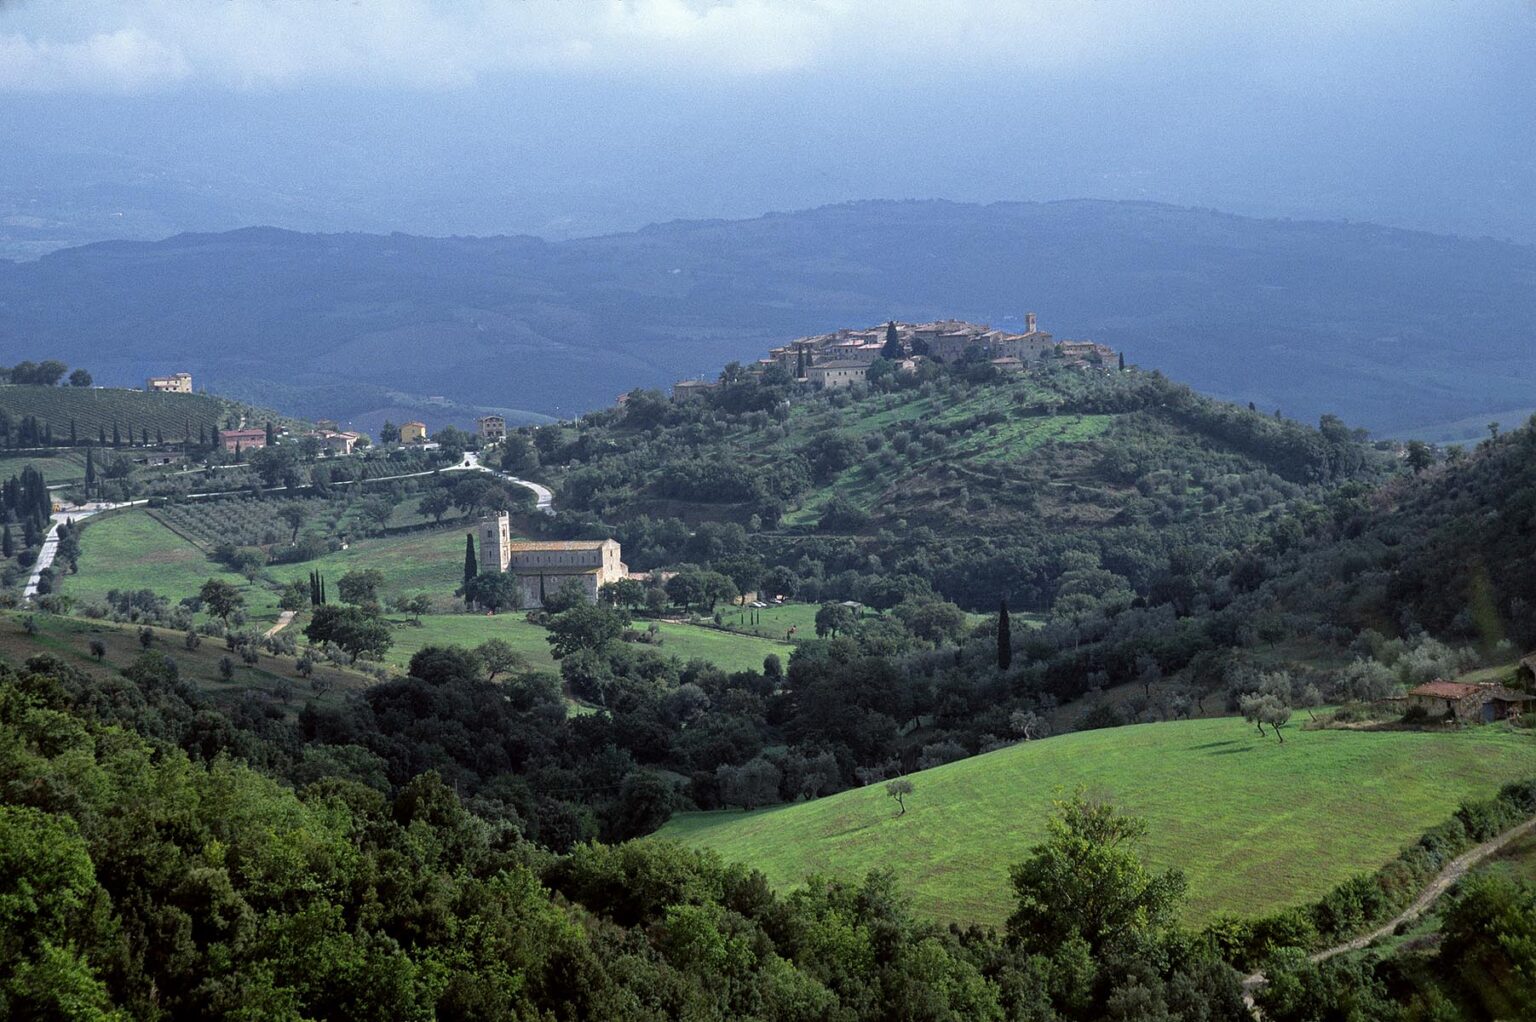 Rolling hills, the Romanesque CHURCH OF SANT' ANTIMO and the town of CASTELNUOVO DELL' ABATE - TUSCANY, ITALY